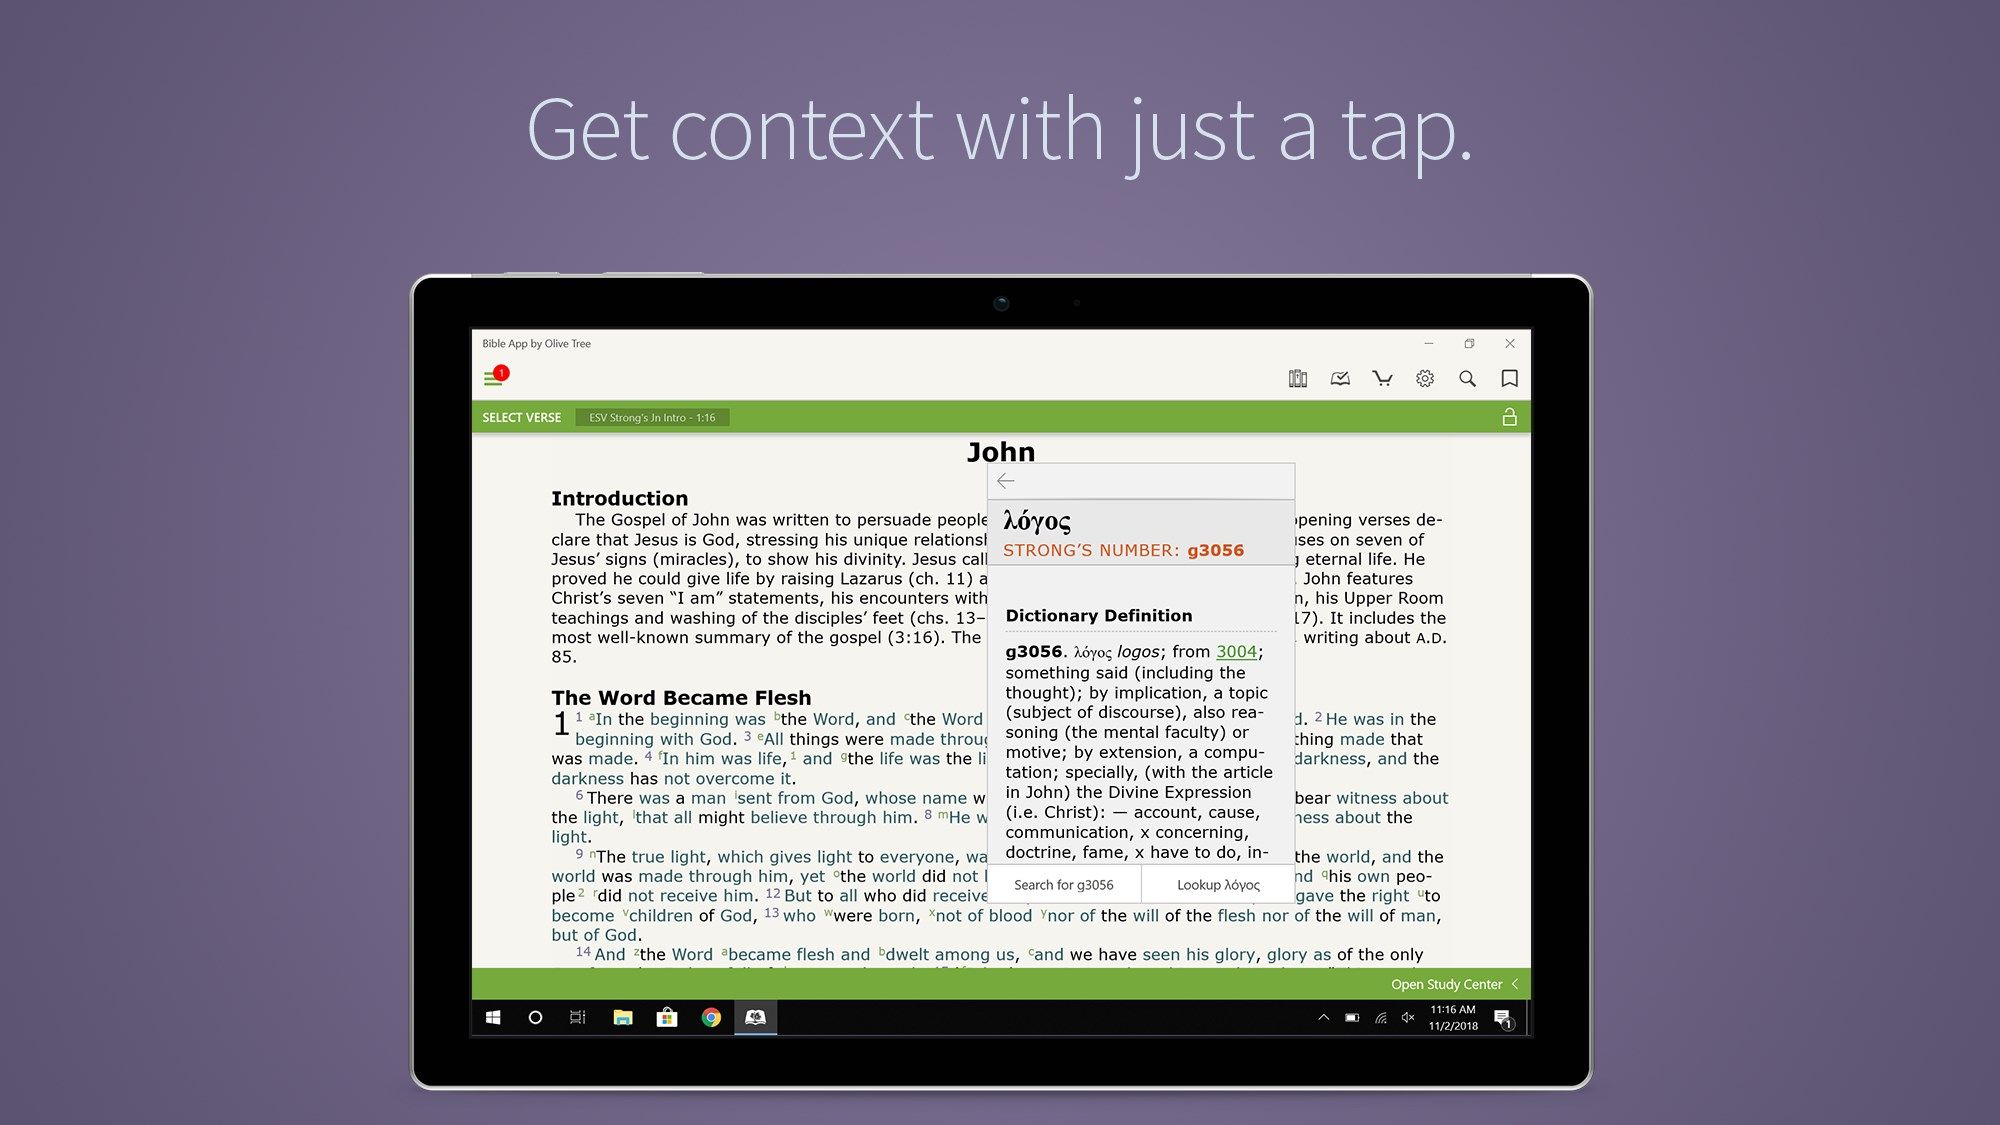 Get context with just a tap.